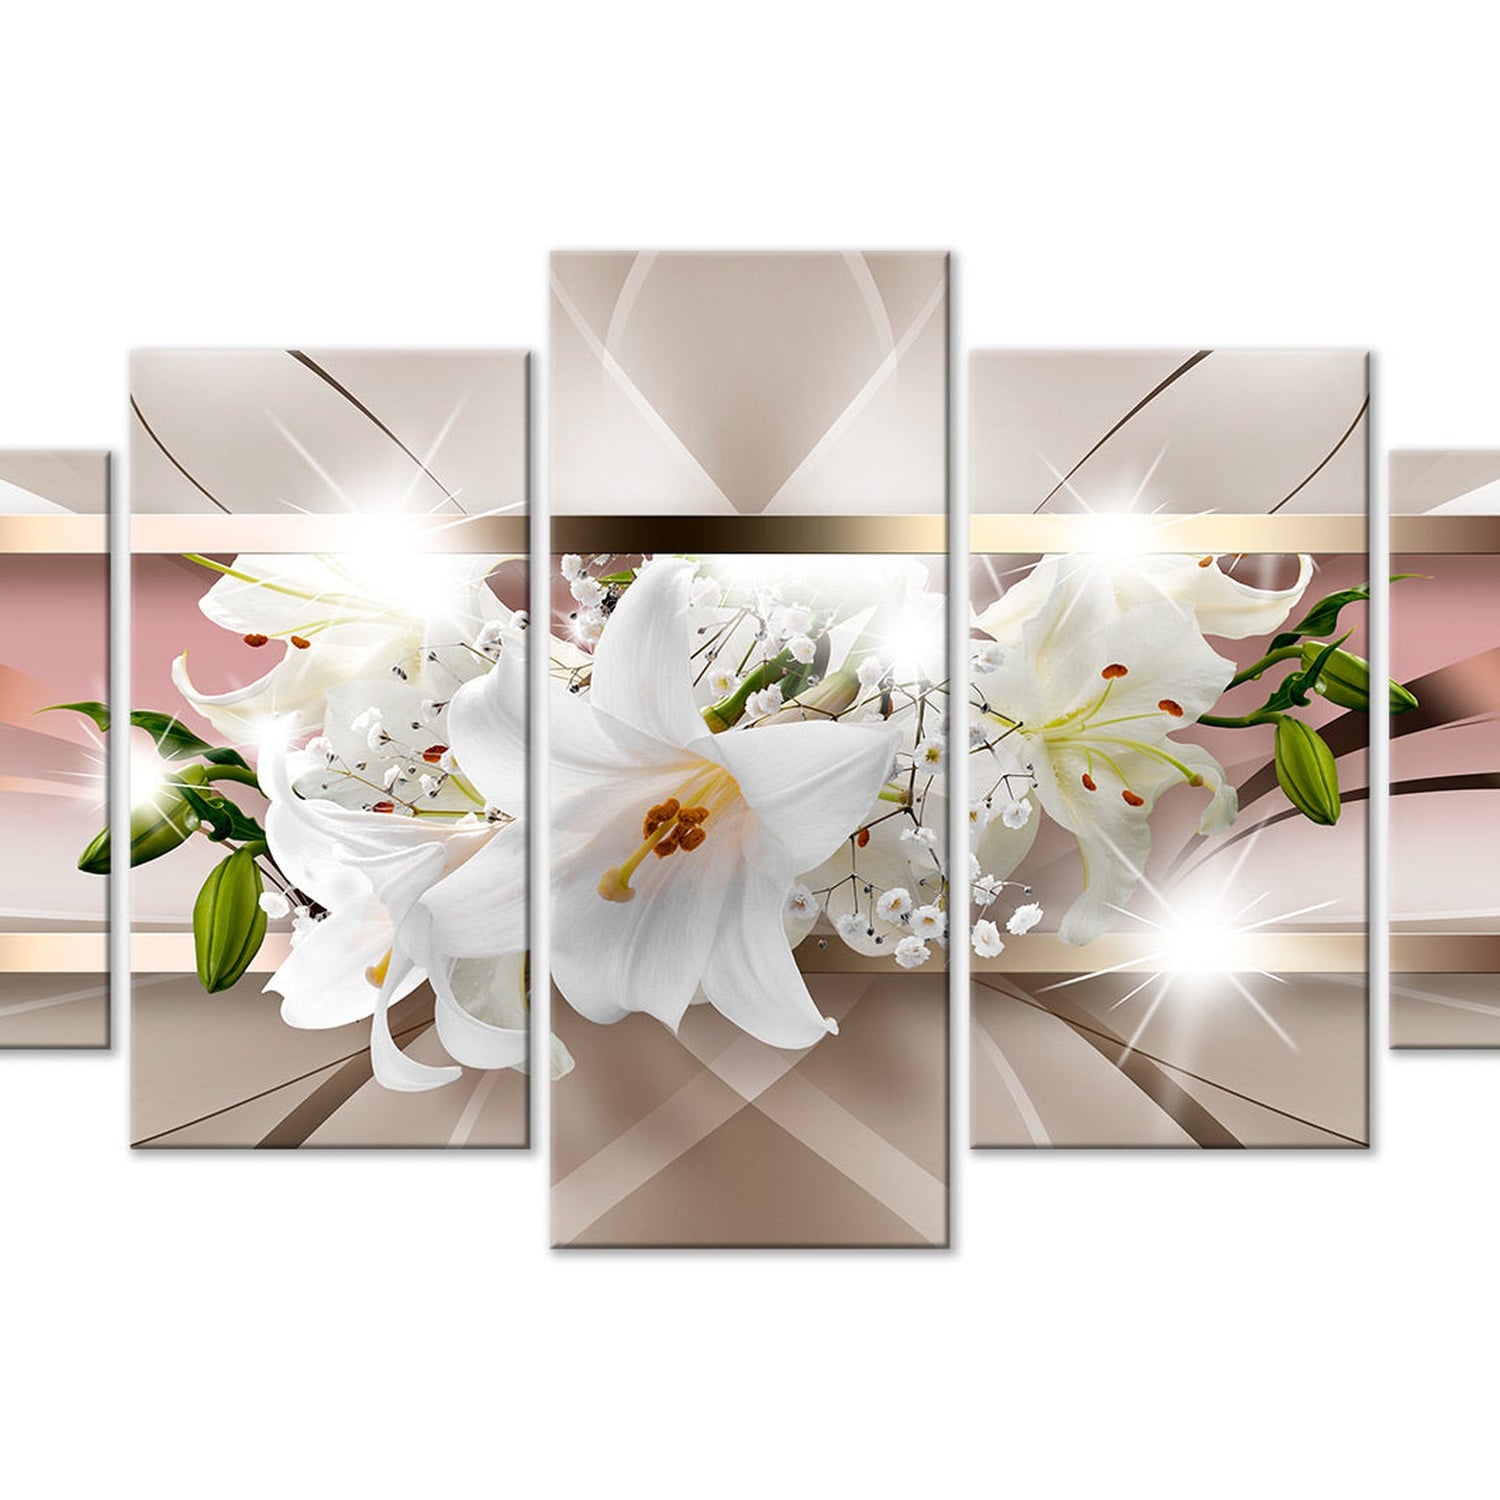 Glamour Canvas Wall Art - Floral Reflection - 5 Pieces